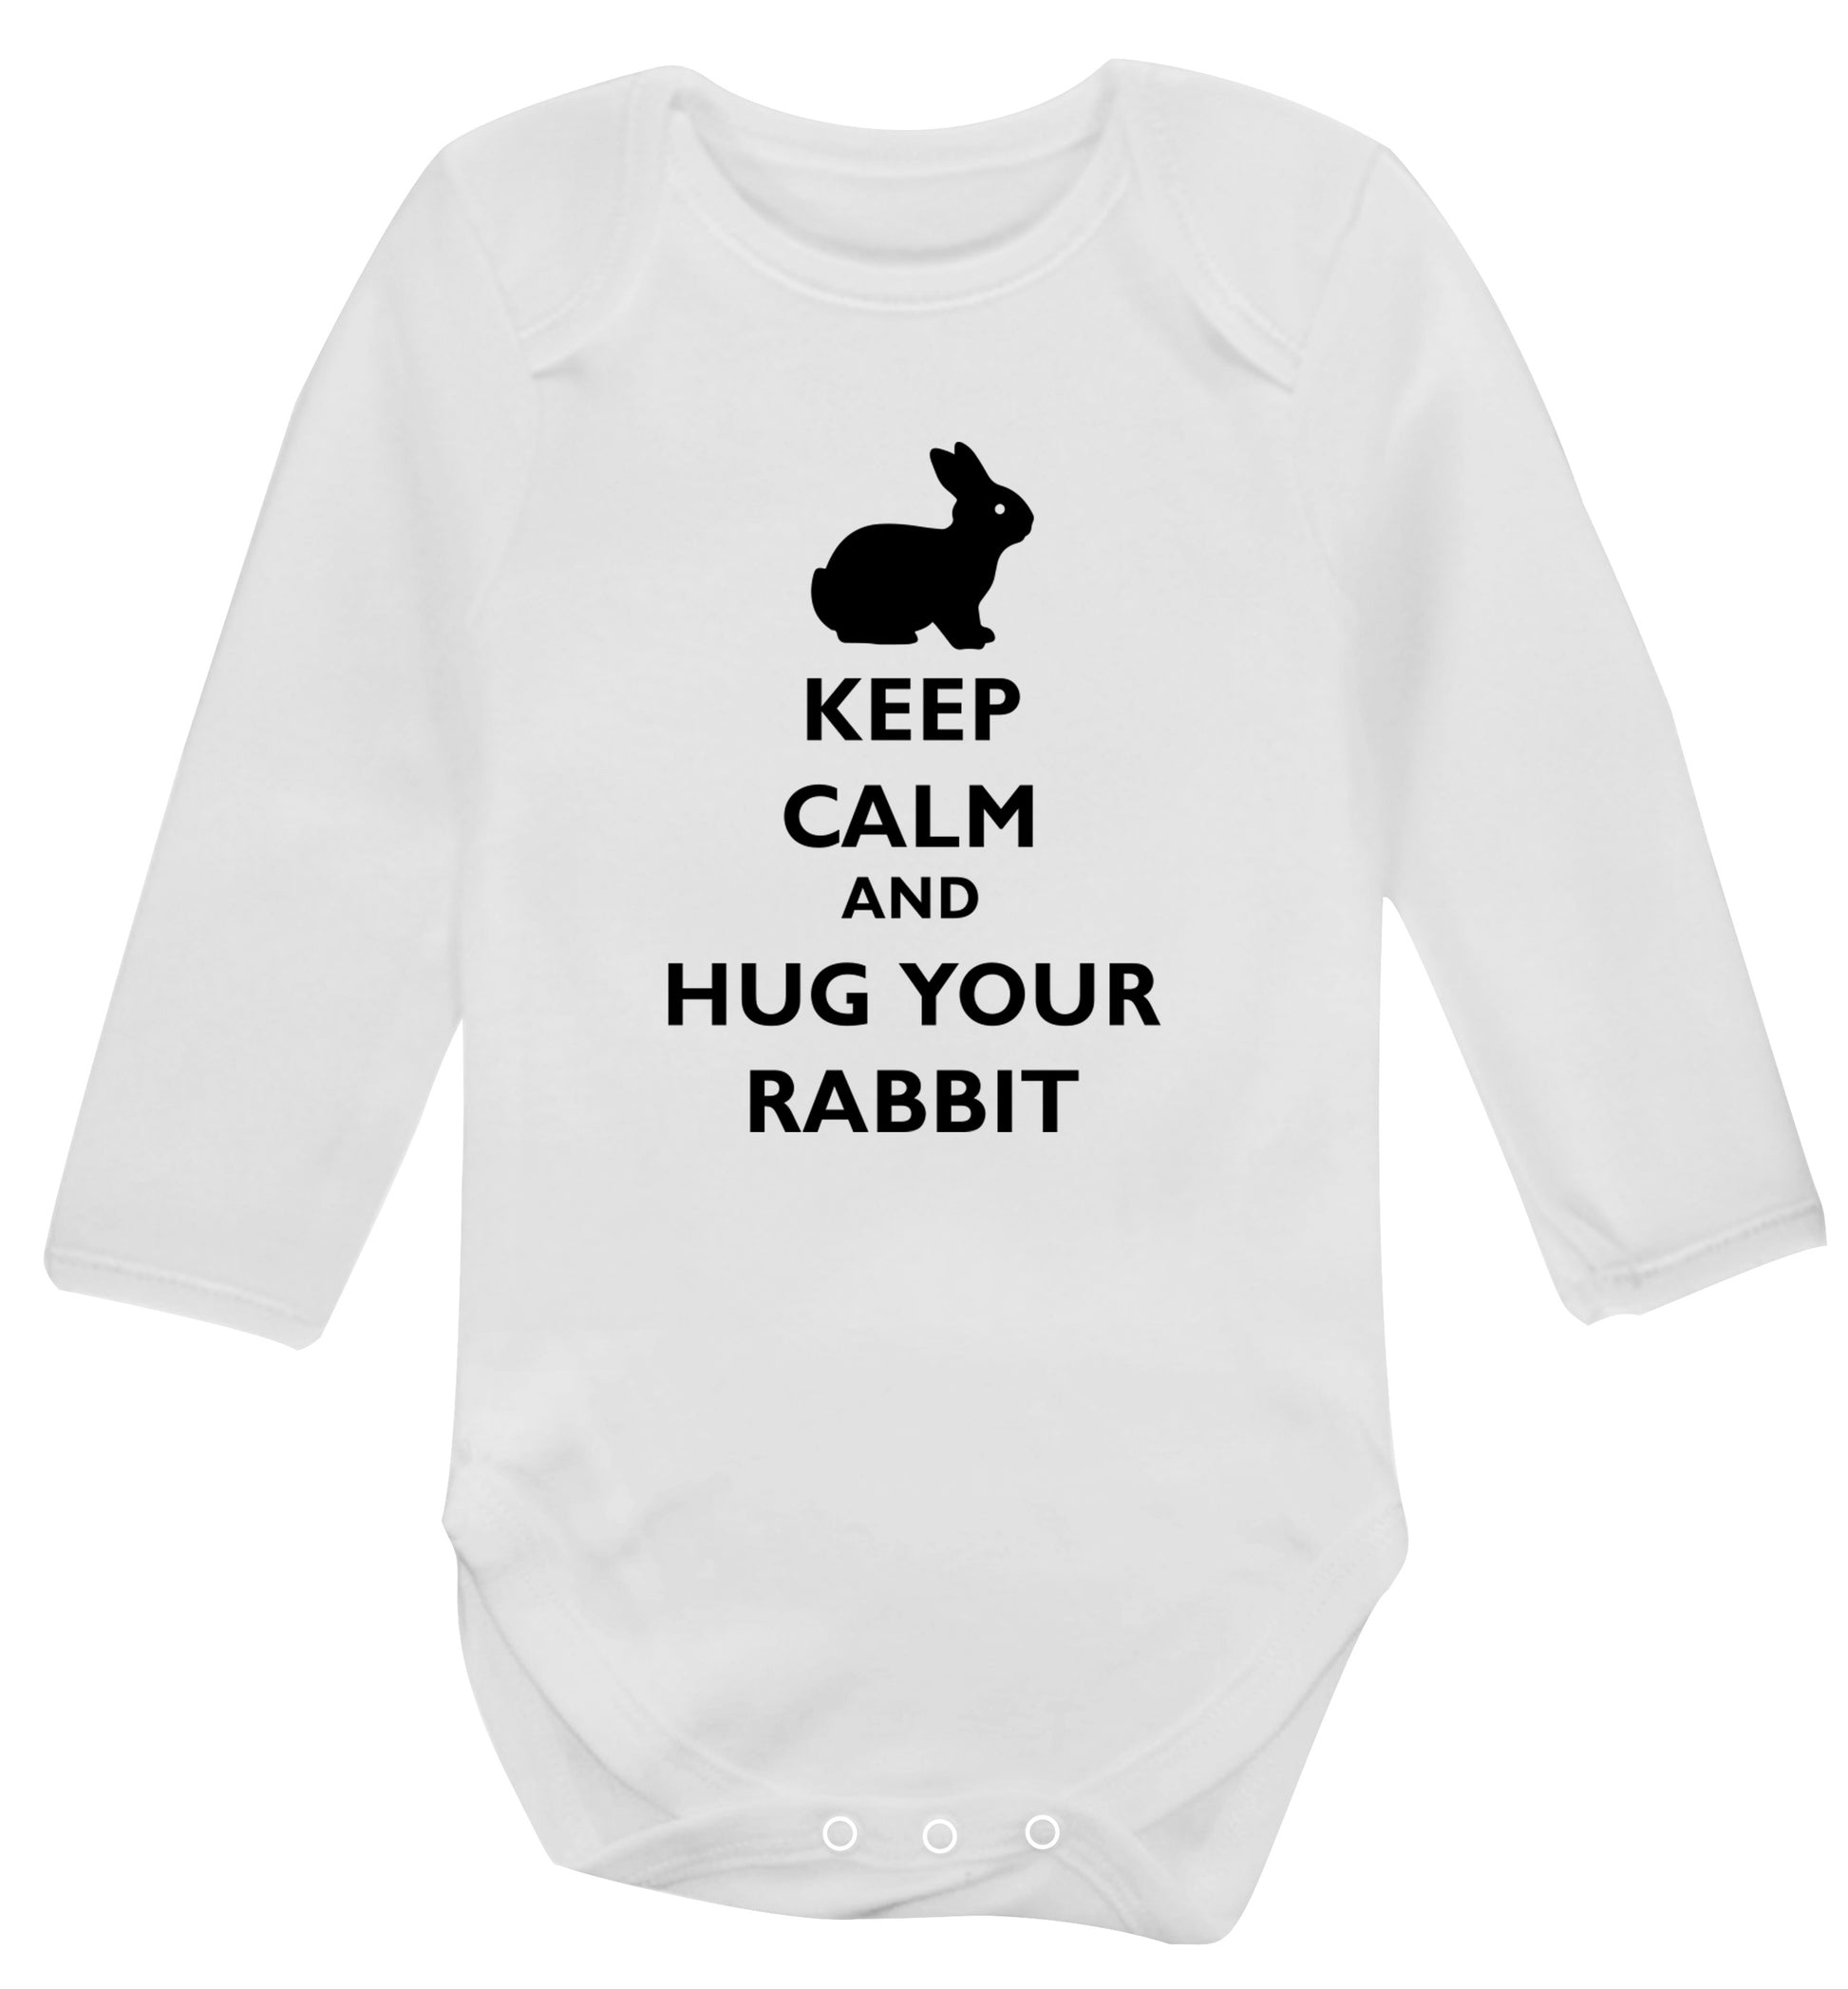 Keep calm and hug your rabbit Baby Vest long sleeved white 6-12 months